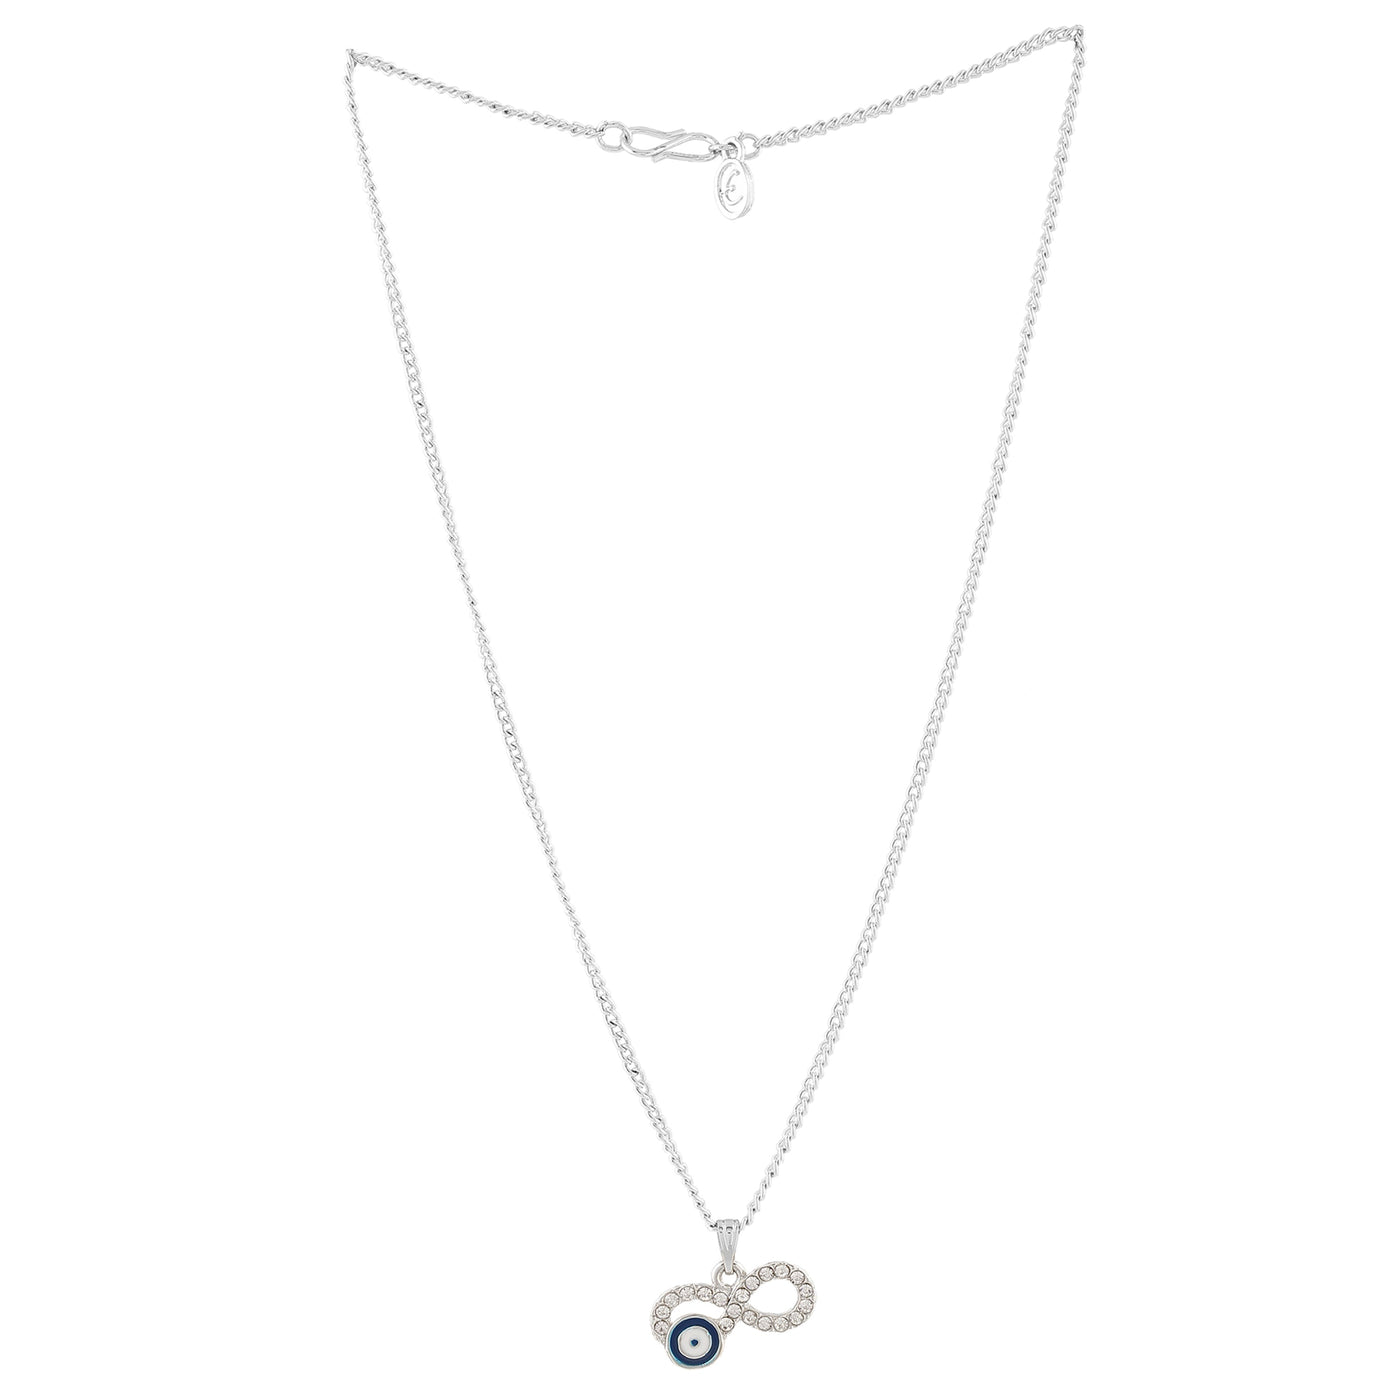 Estele Rhodium Plated Sparkling Infinity Evil Eye Charm Pendant with Austrian Crystals for Girls/Women